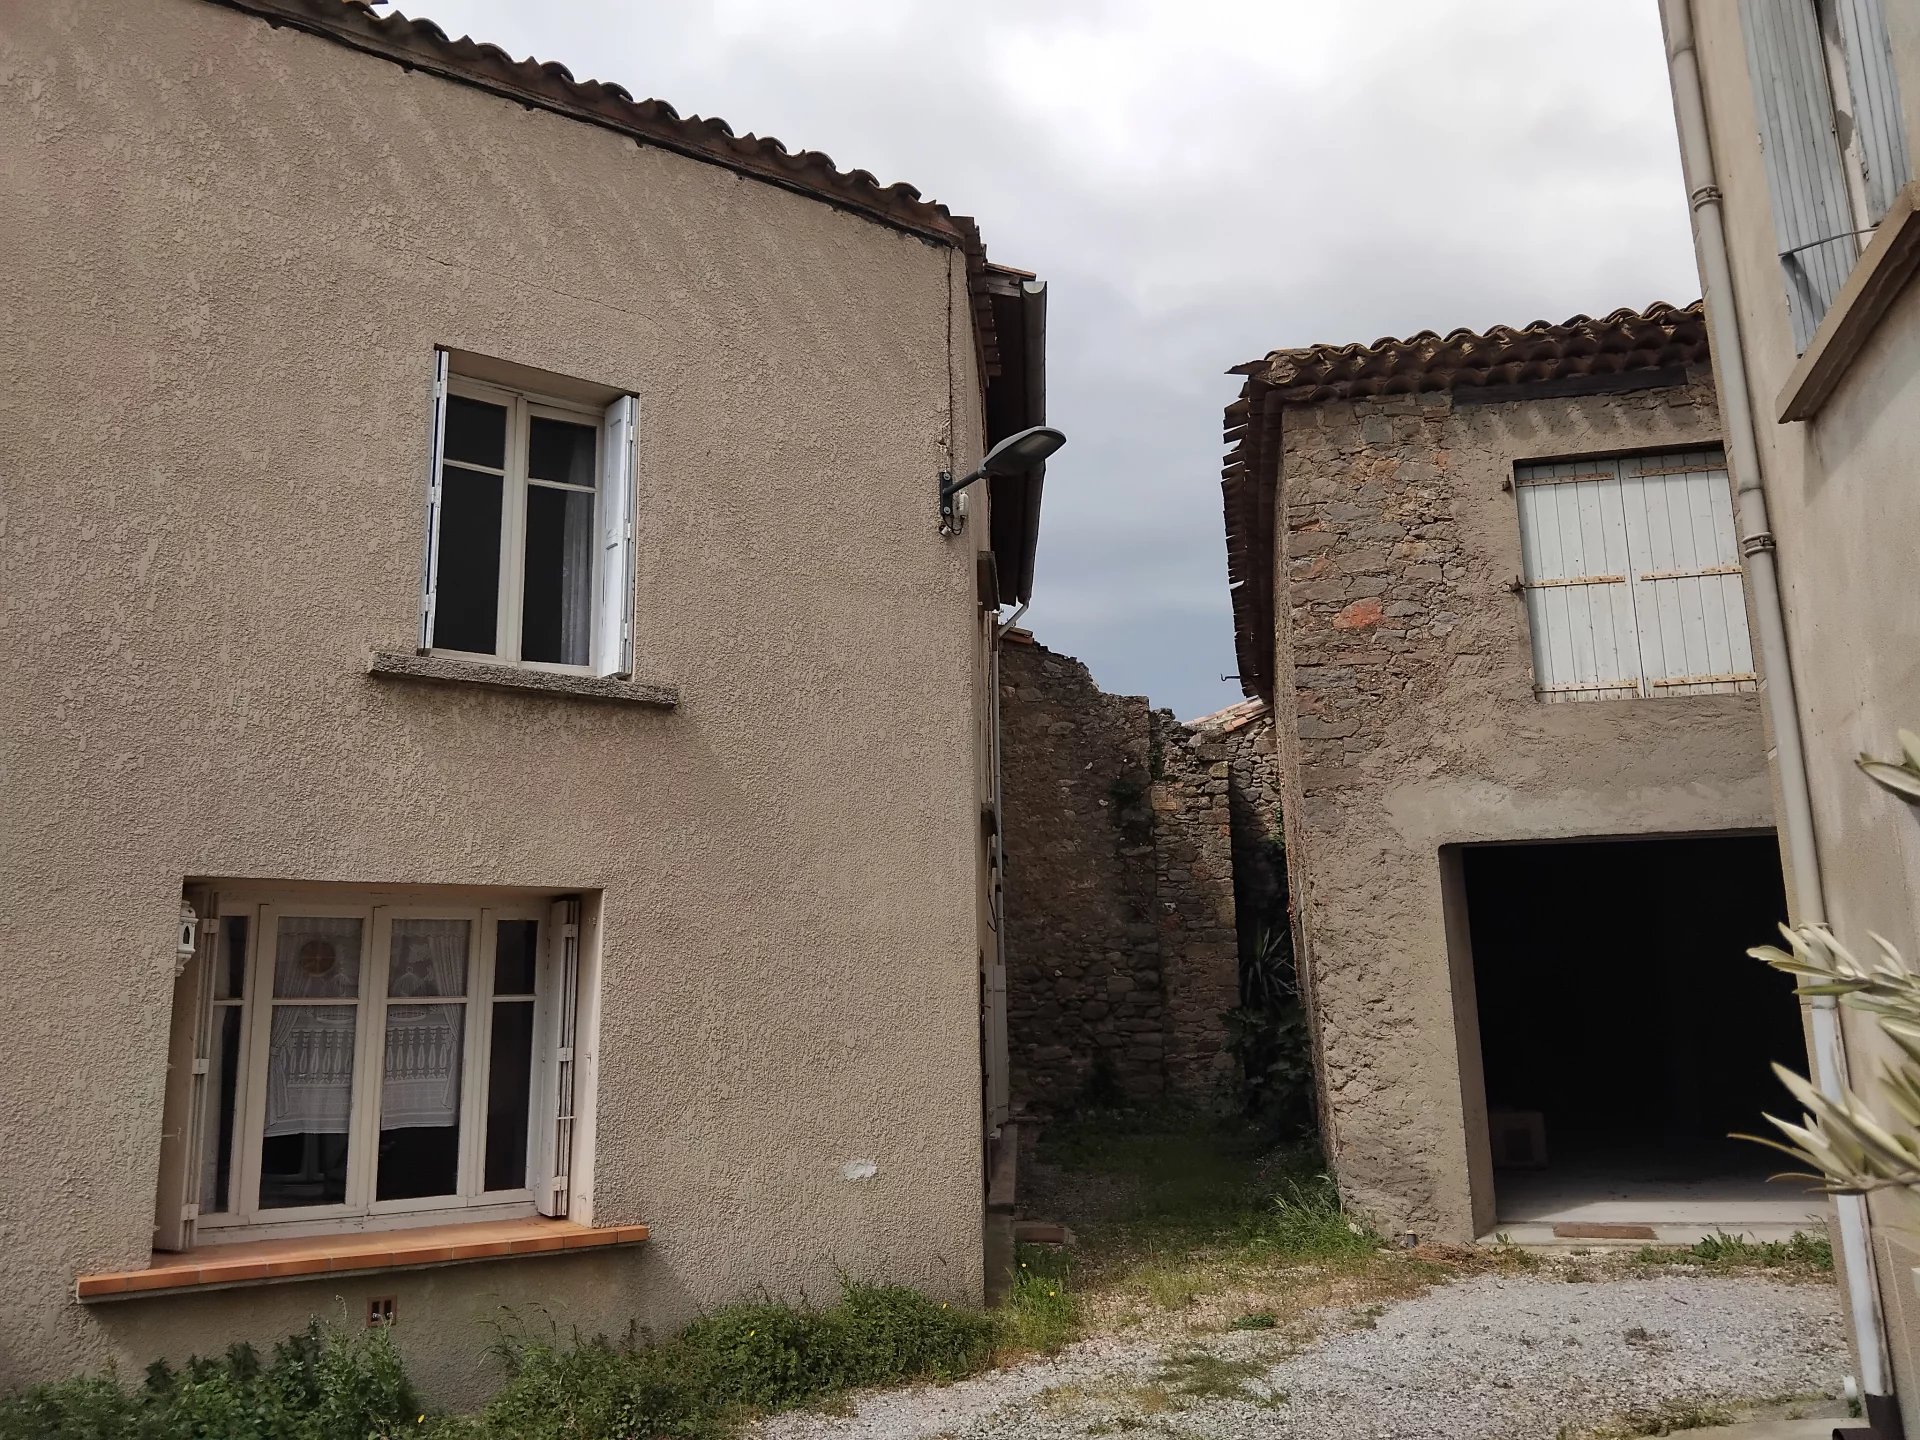 Village house, 3 bedrooms, terrace, courtyard and garage in the heart of the minervois region